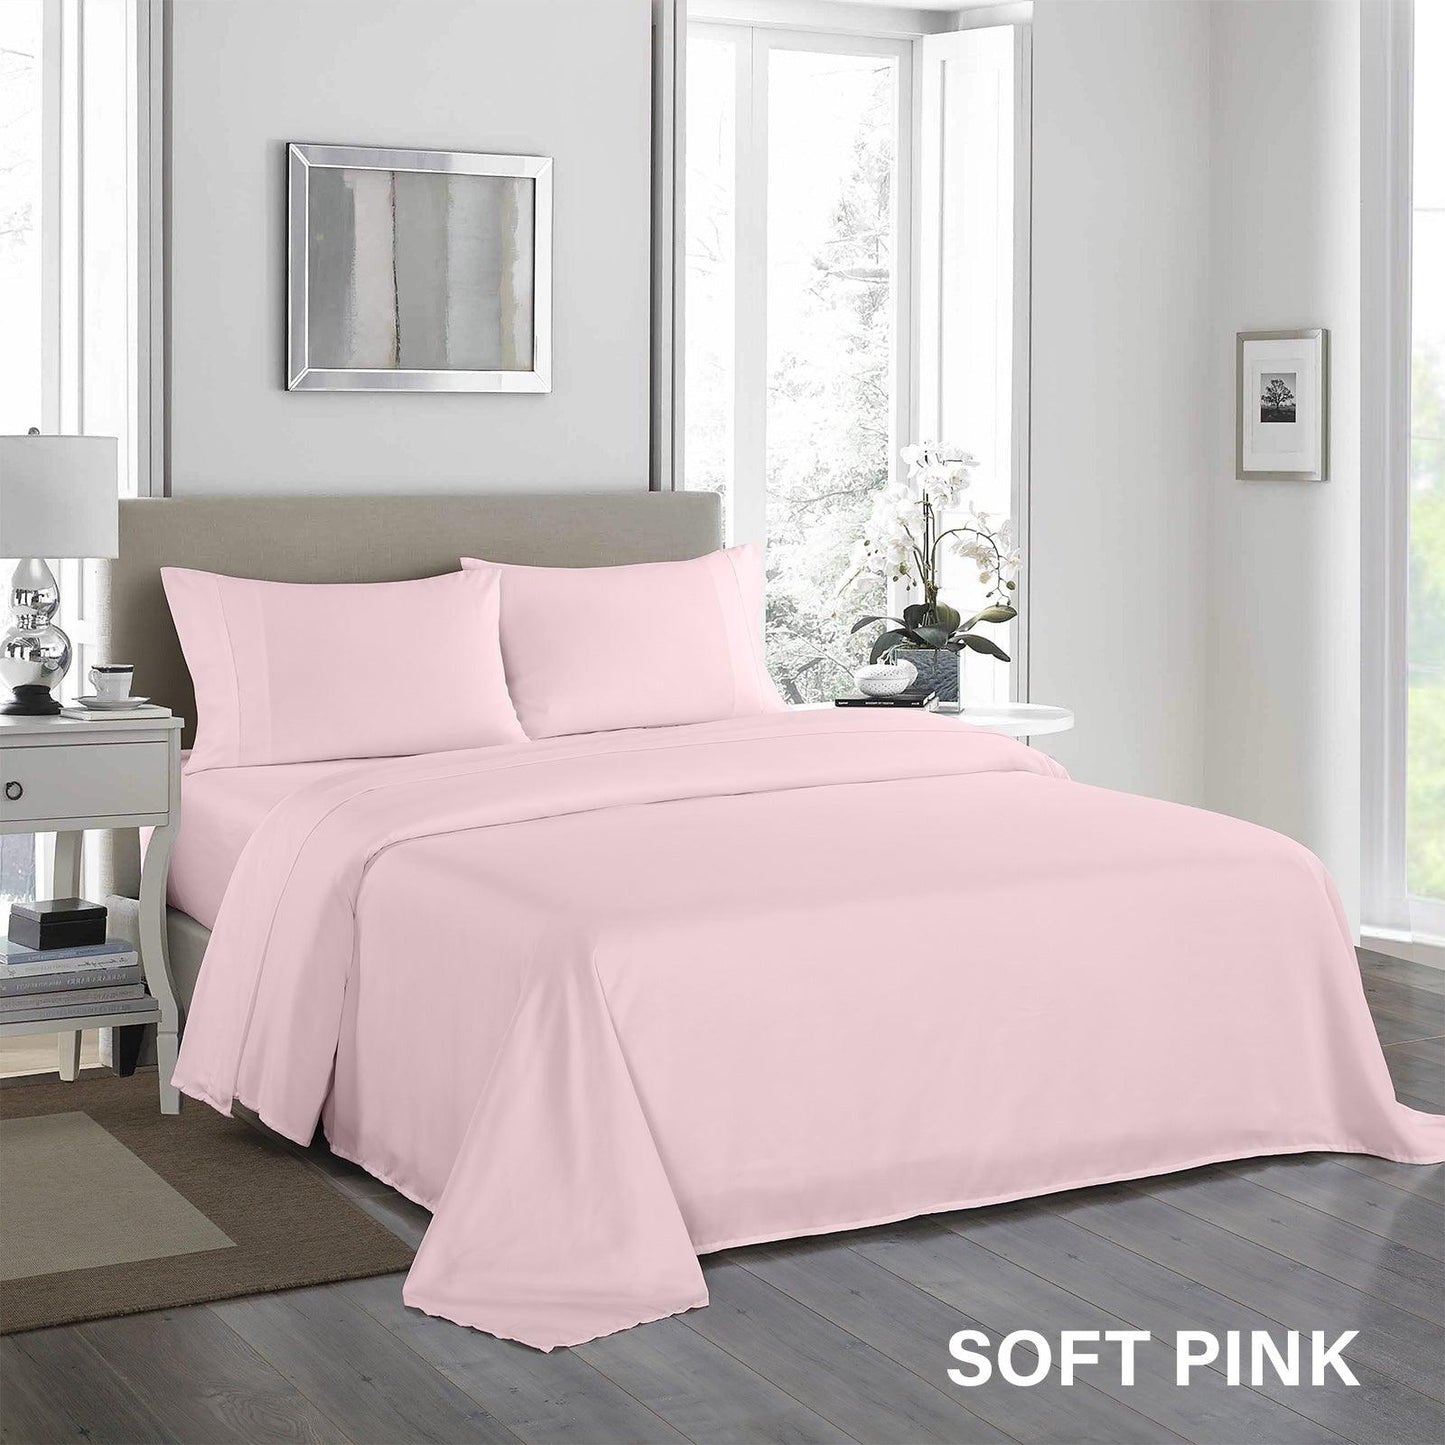 Royal Comfort 1200 Thread Count Sheet Set 4 Piece Ultra Soft Satin Weave Finish - Double - Soft Pink